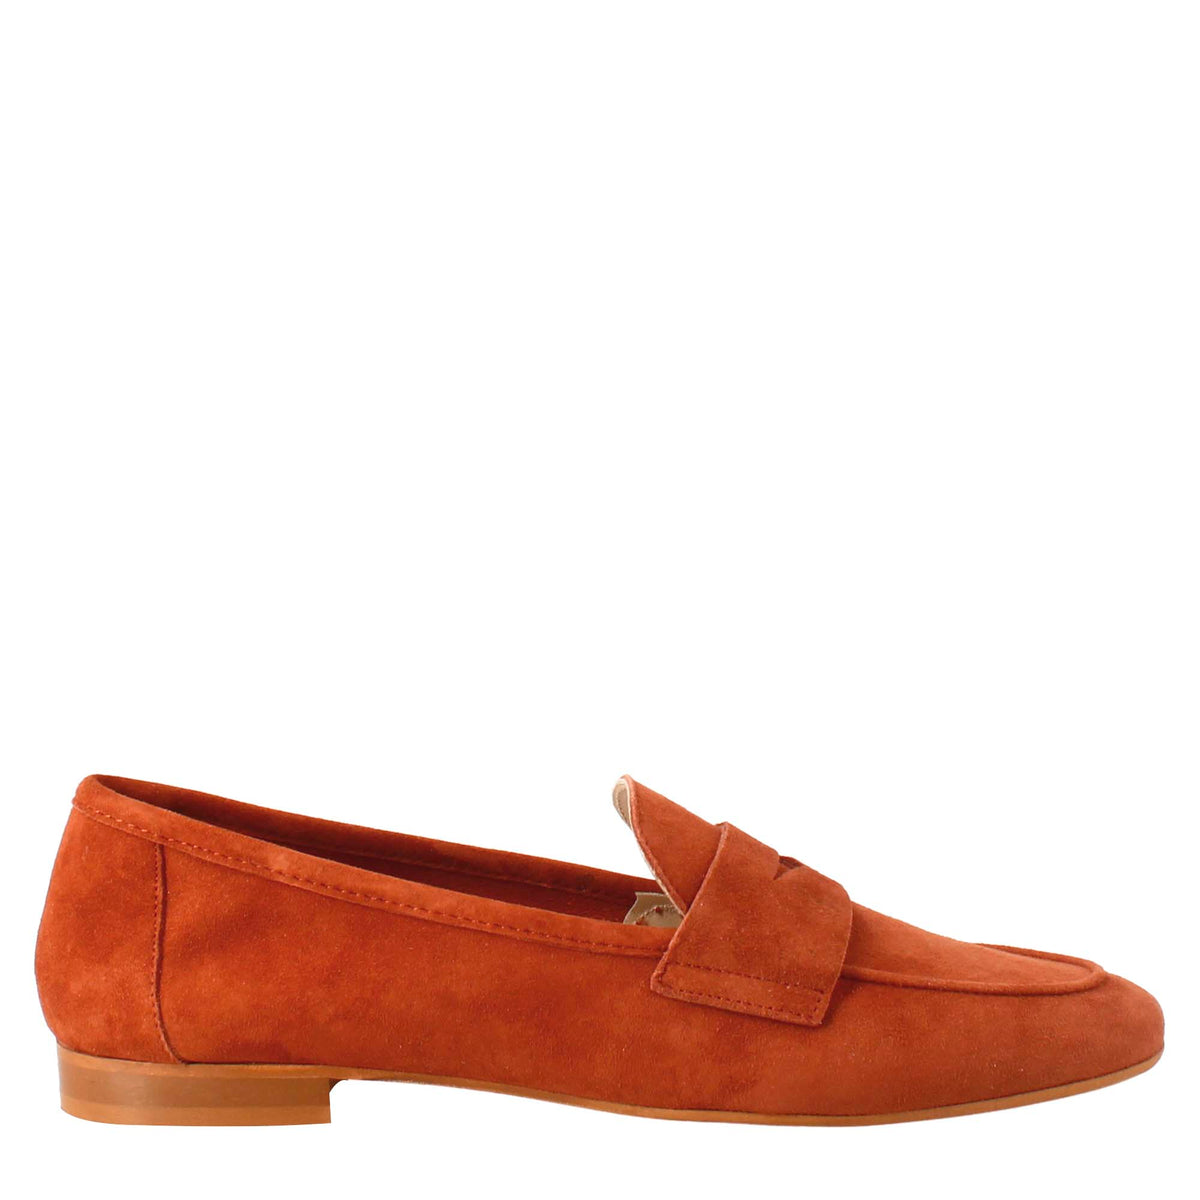 Handmade women's moccasin in tan-colored suede.